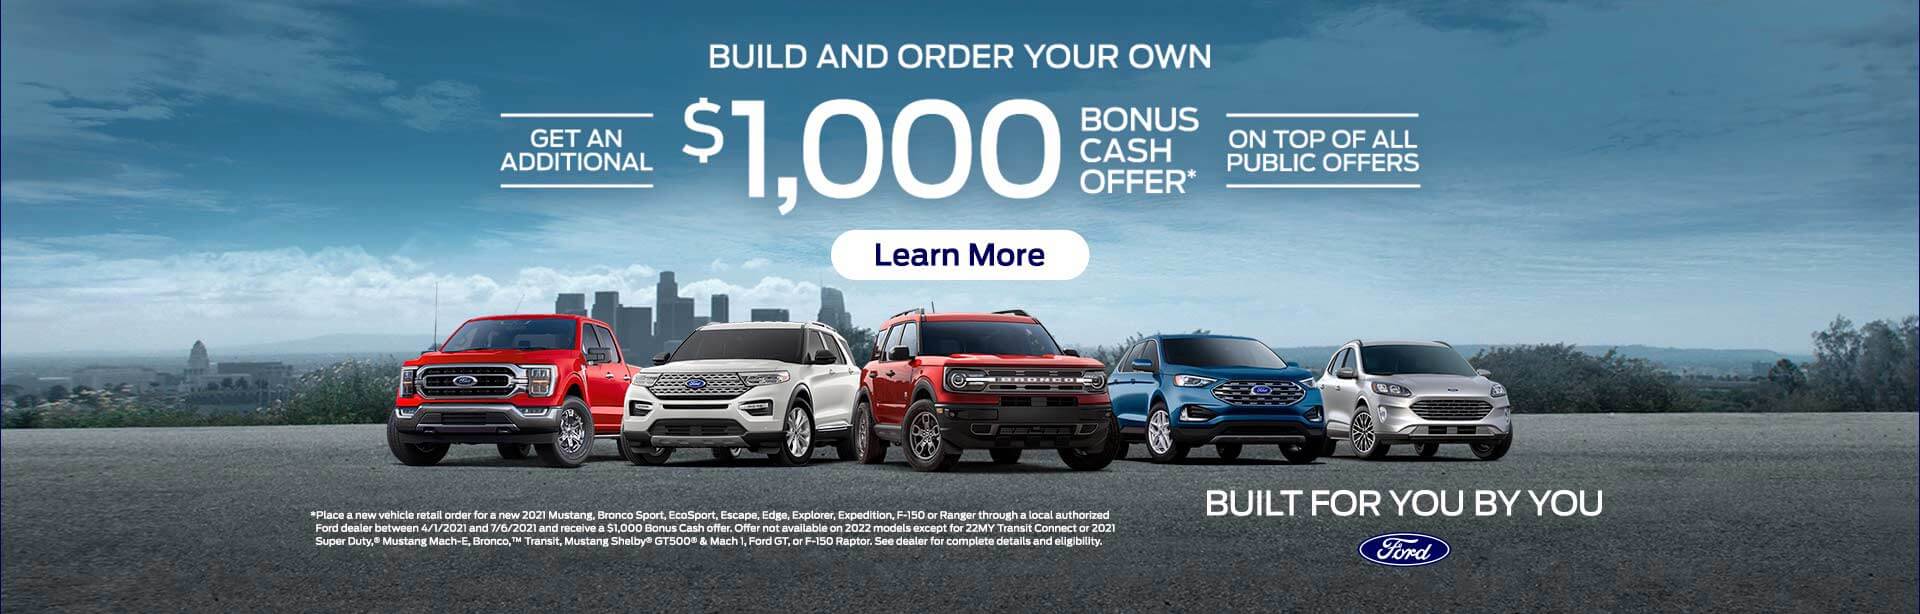 Build And Order Your Own Vehicles